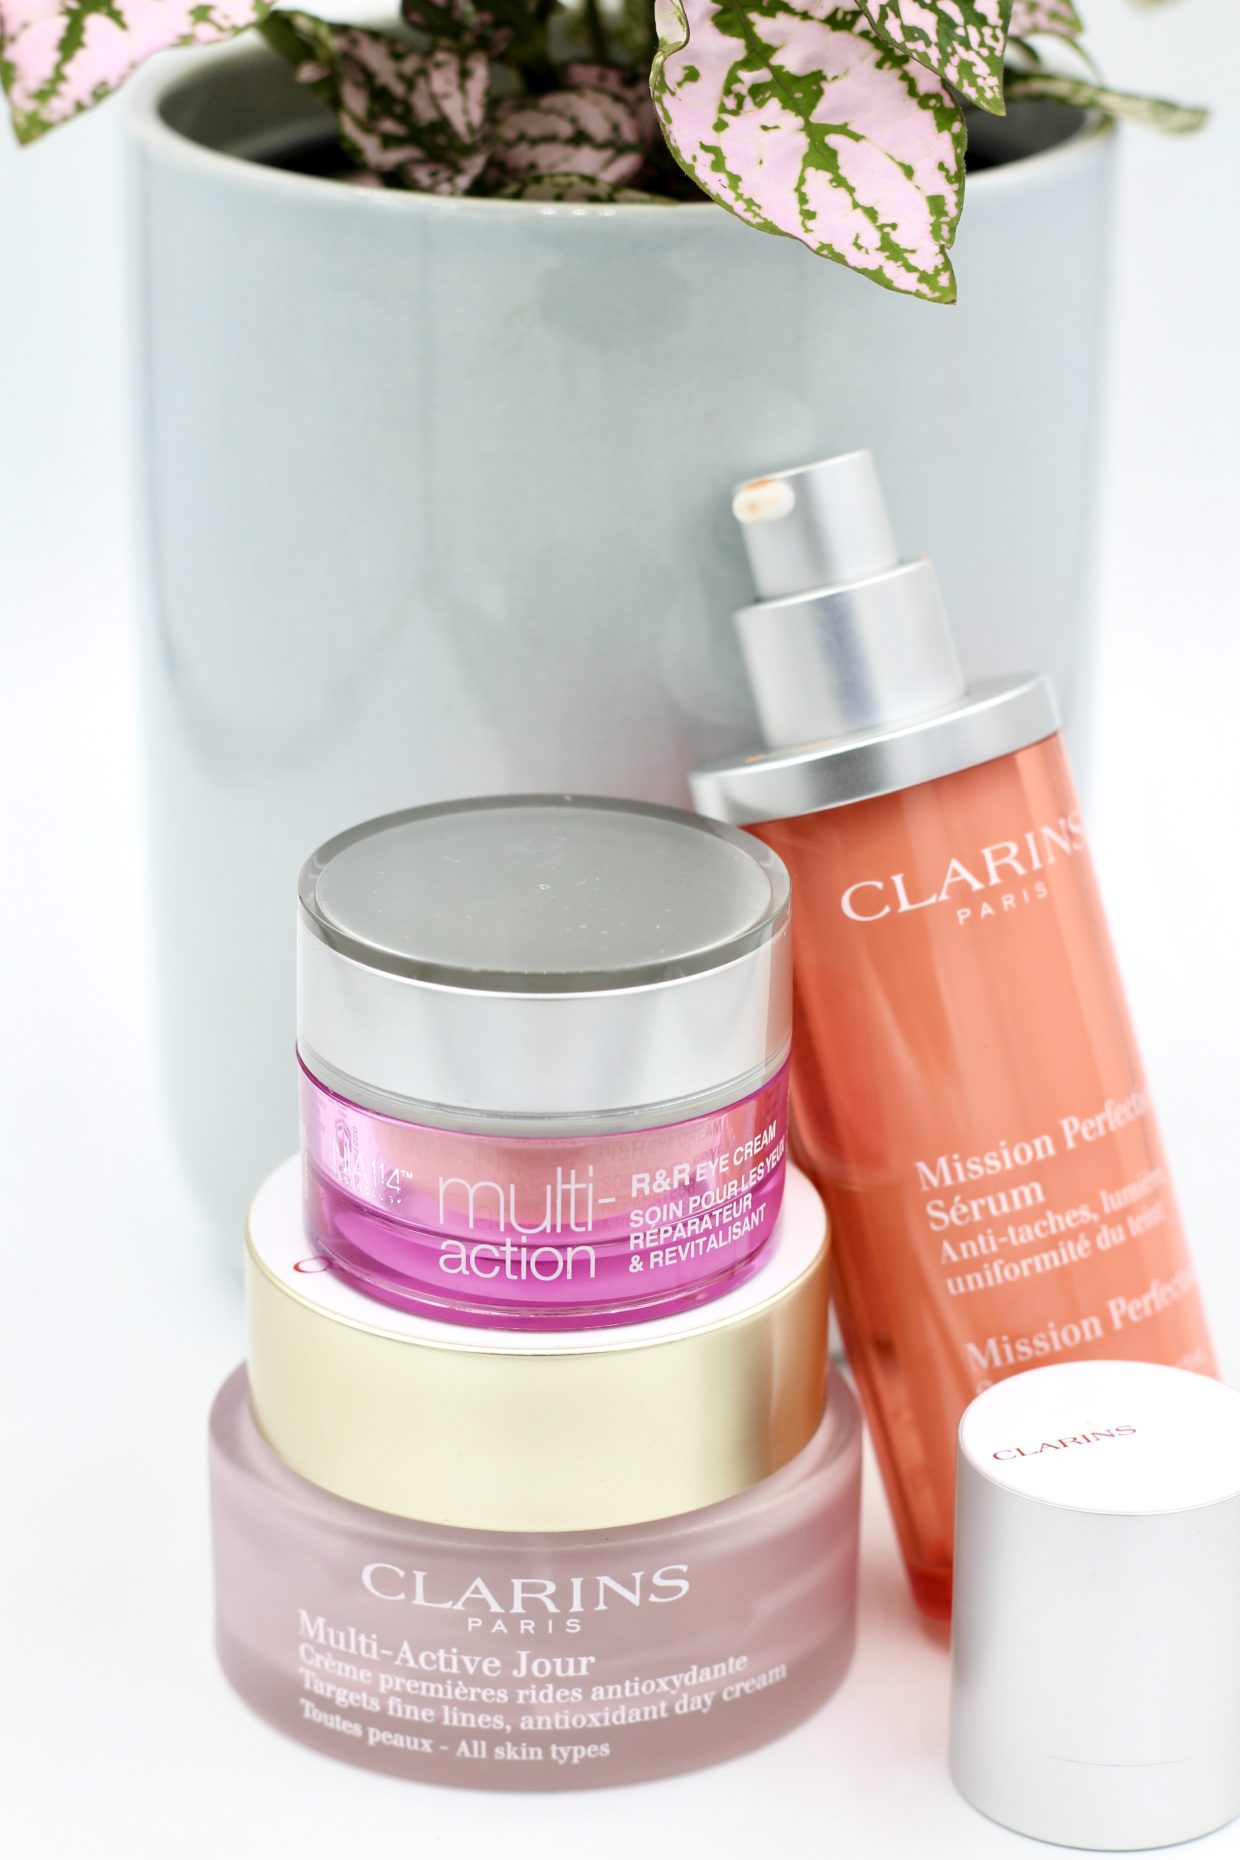 Clarins Mission Perfection Serum review